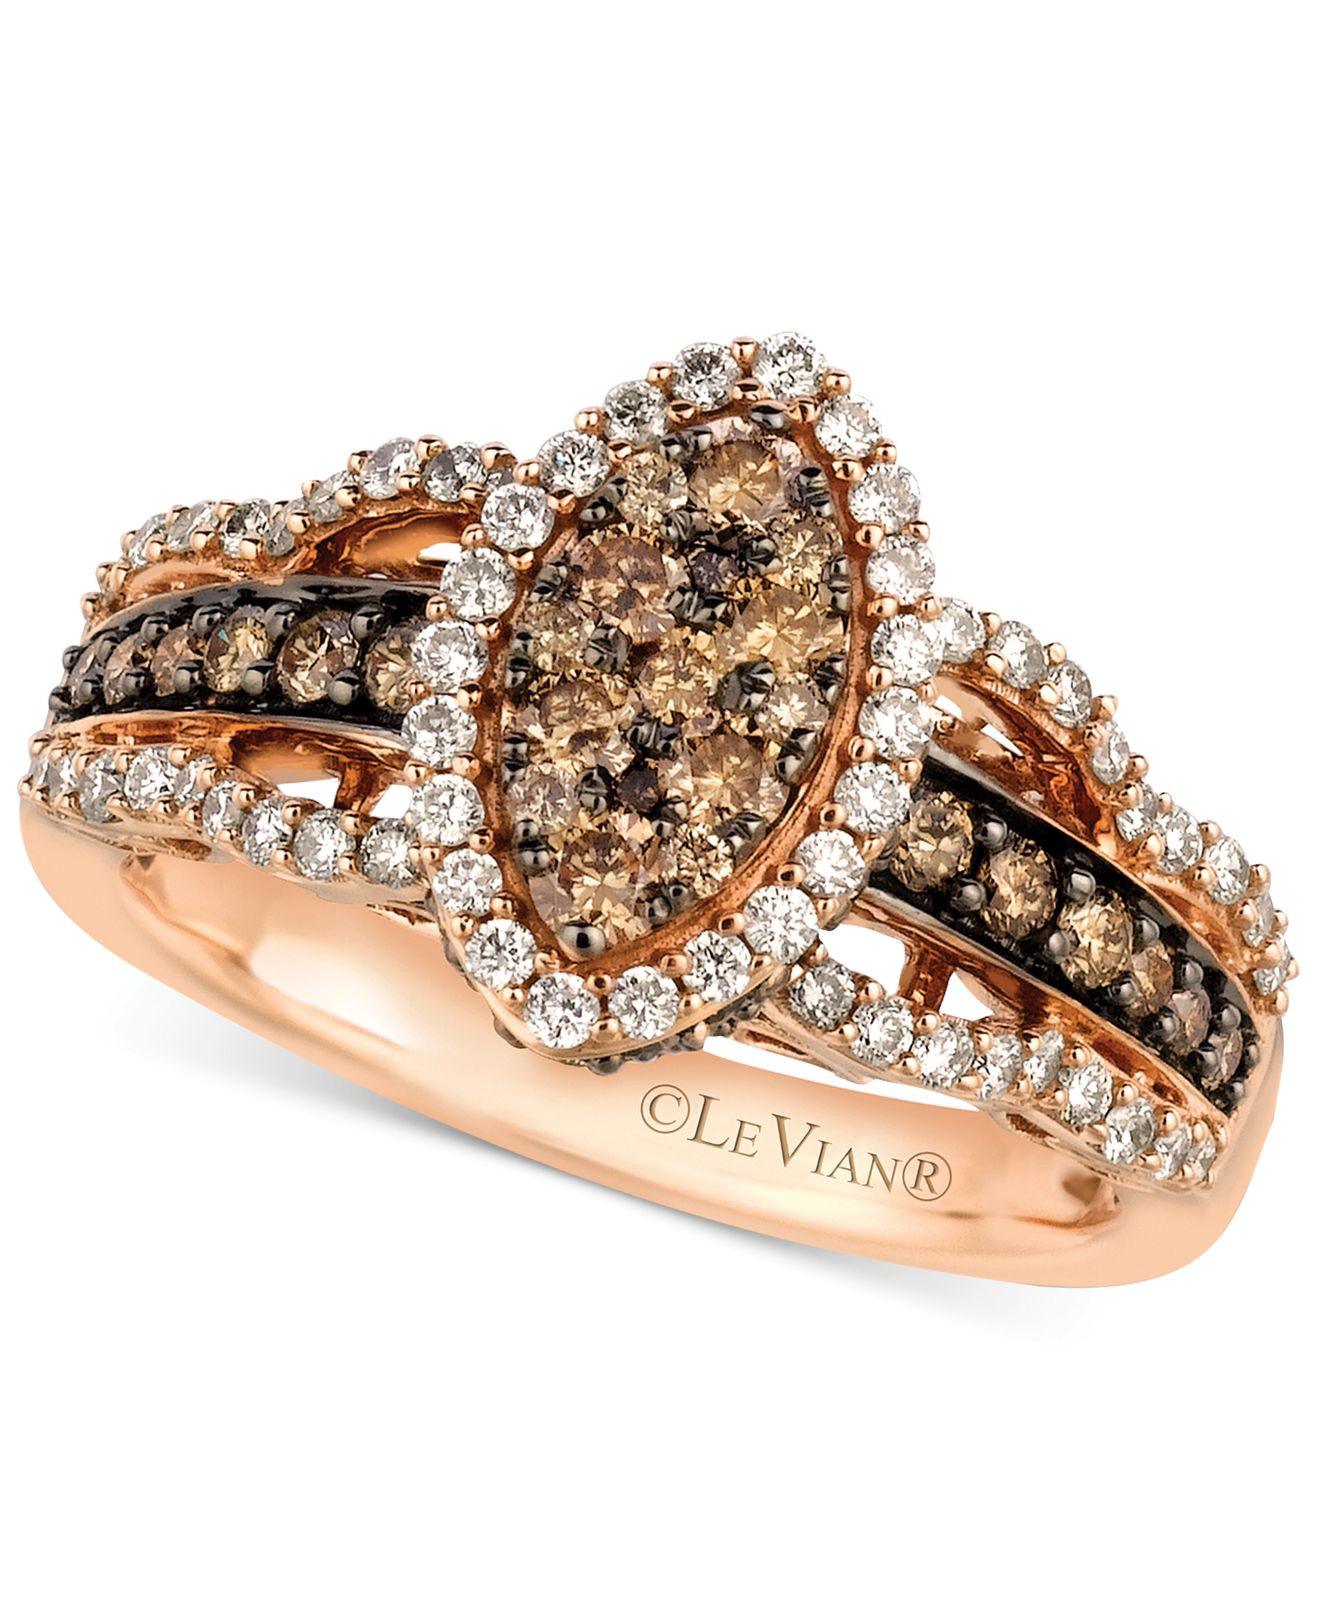 Chocolate Diamond Rings For Women
 Le vian White And Chocolate Diamond Ring In 14k Rose Gold